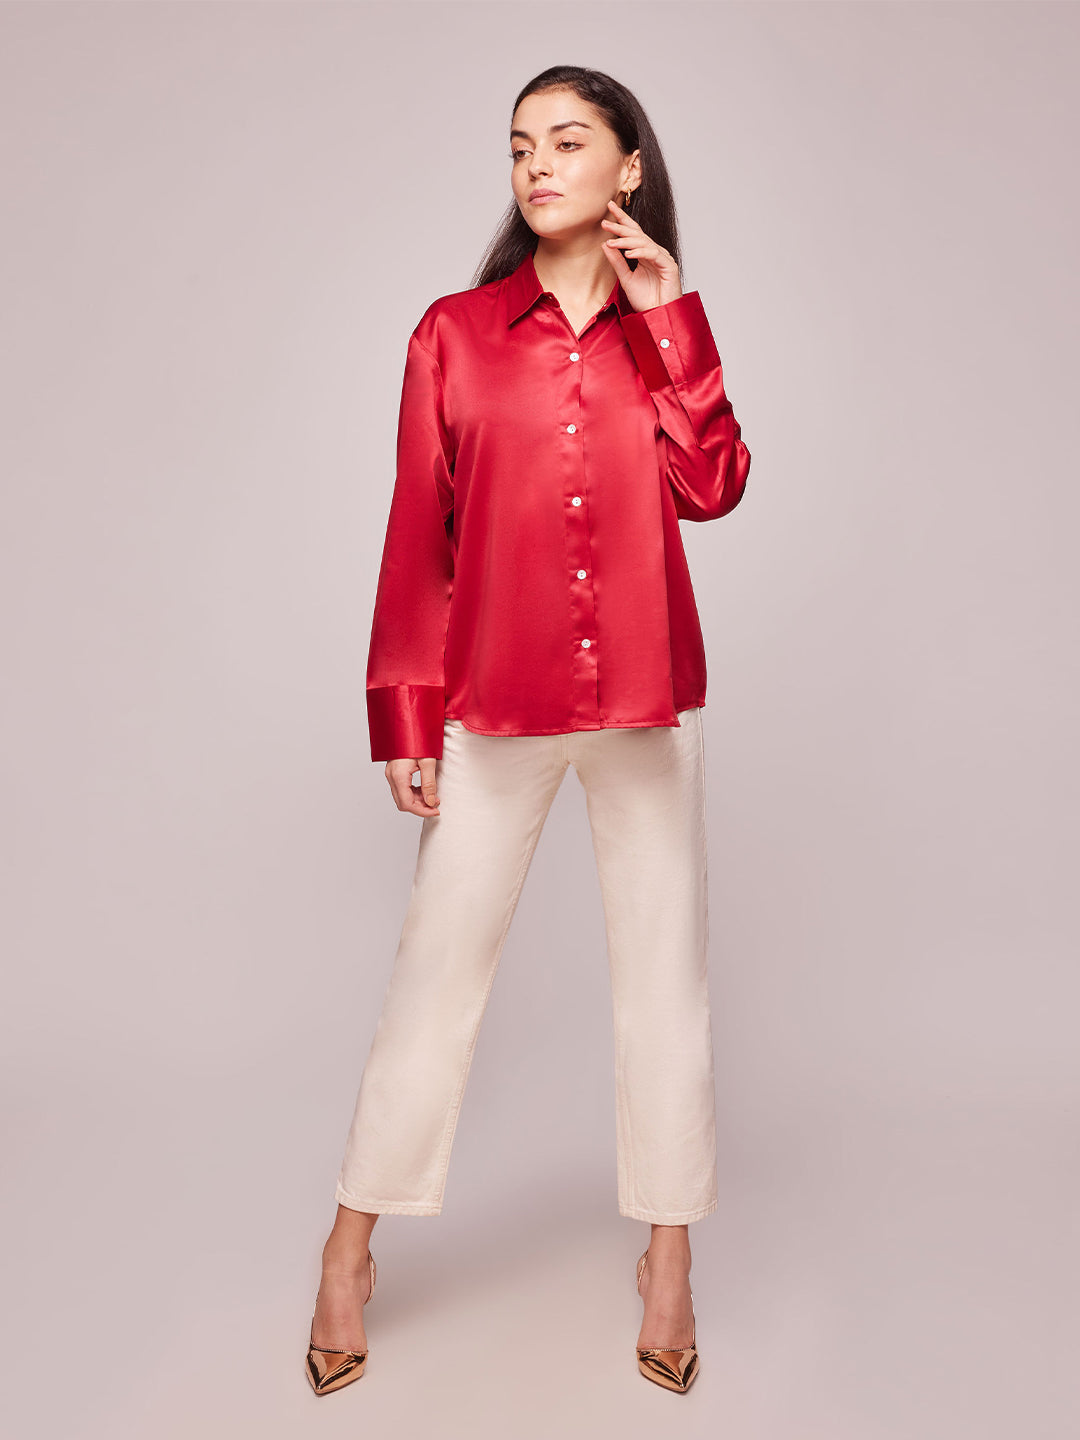 Bombay High Women's Ruby Red Solid Satin Shirt